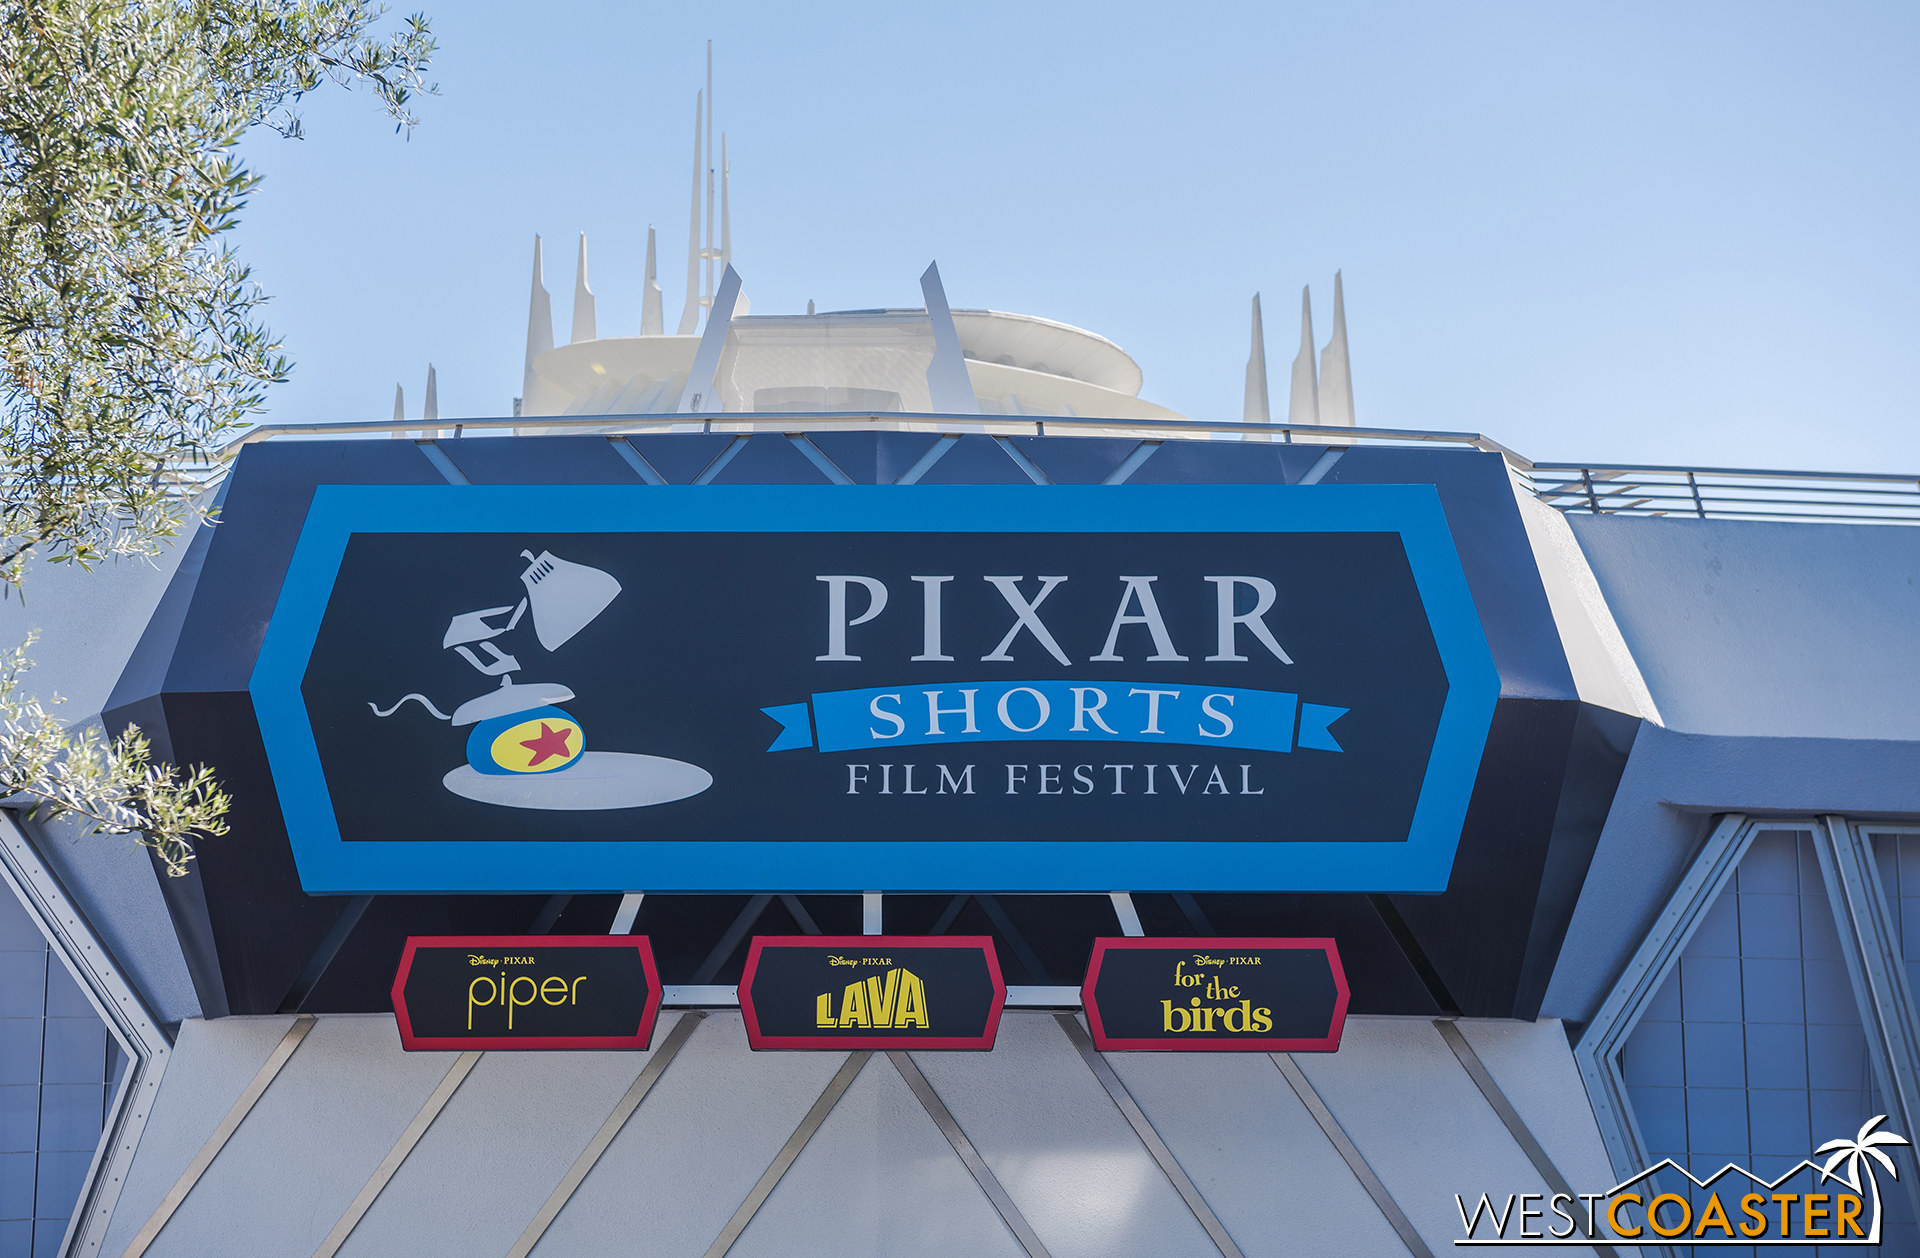  Missed the Pixar Shorts Film Festival? Never fear! You can still see these three short films plus three more in Hollywood Land in DCA! 